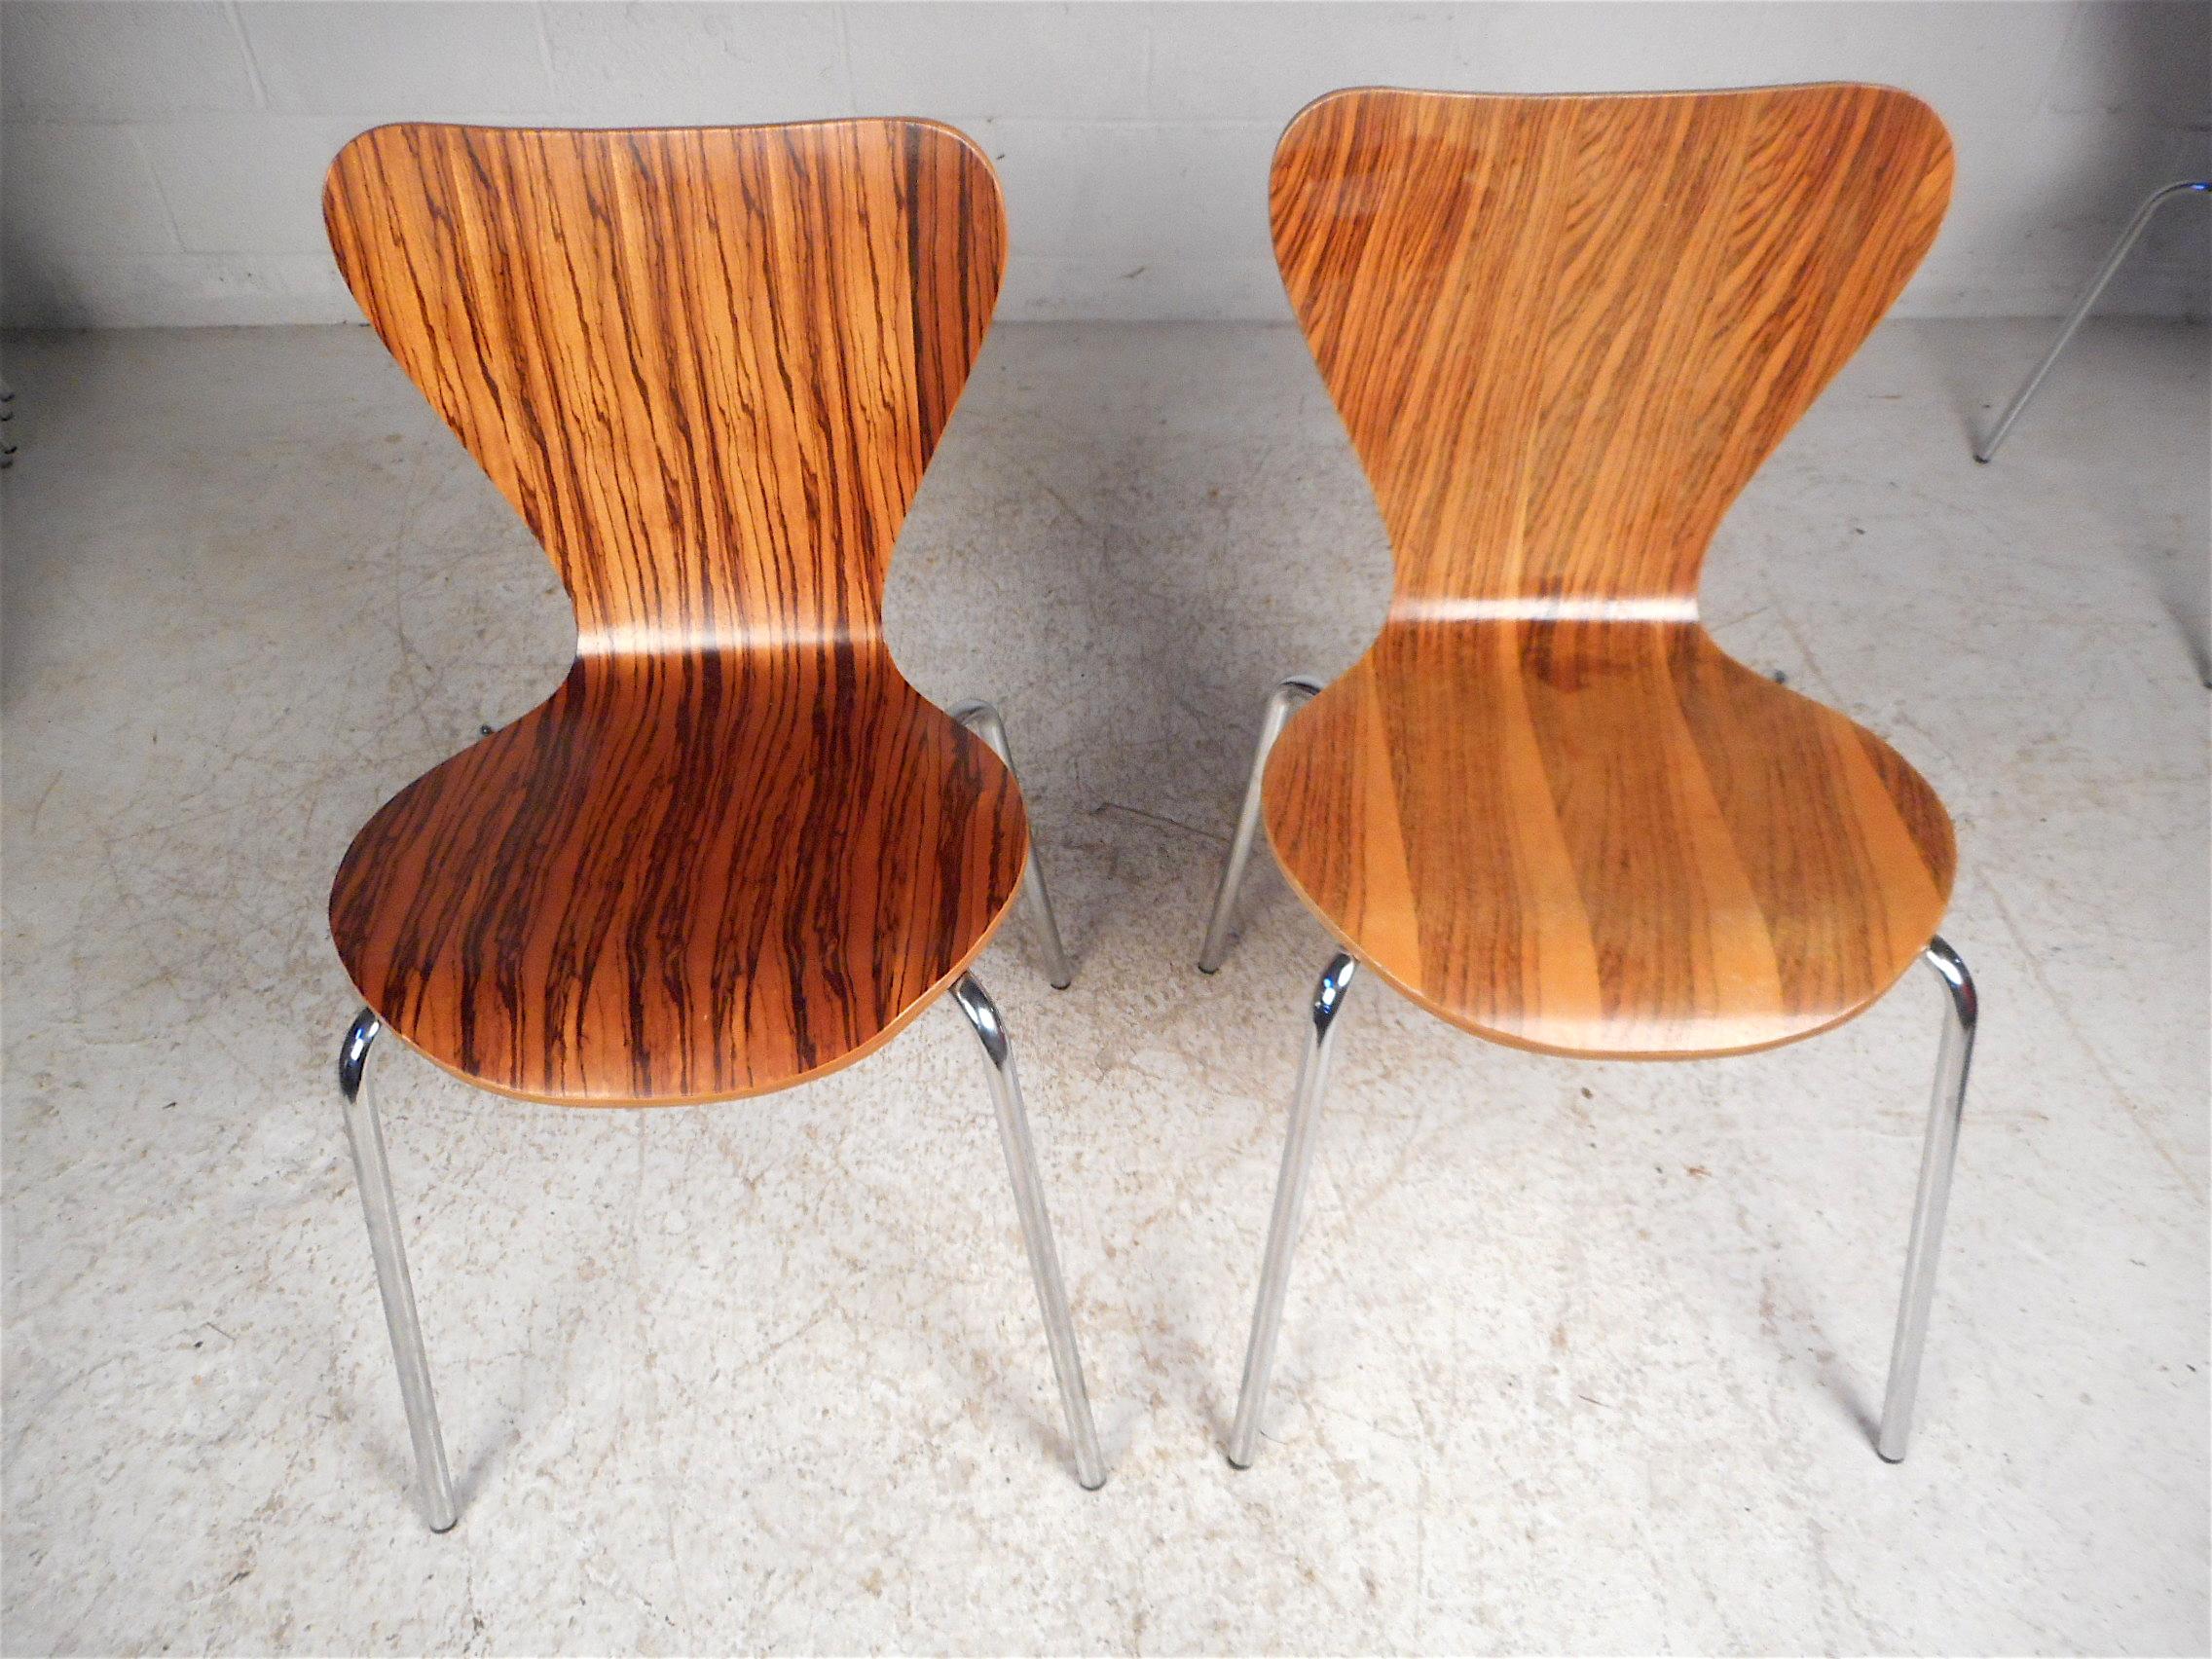 20th Century Midcentury Style Bentwood Stacking Chairs